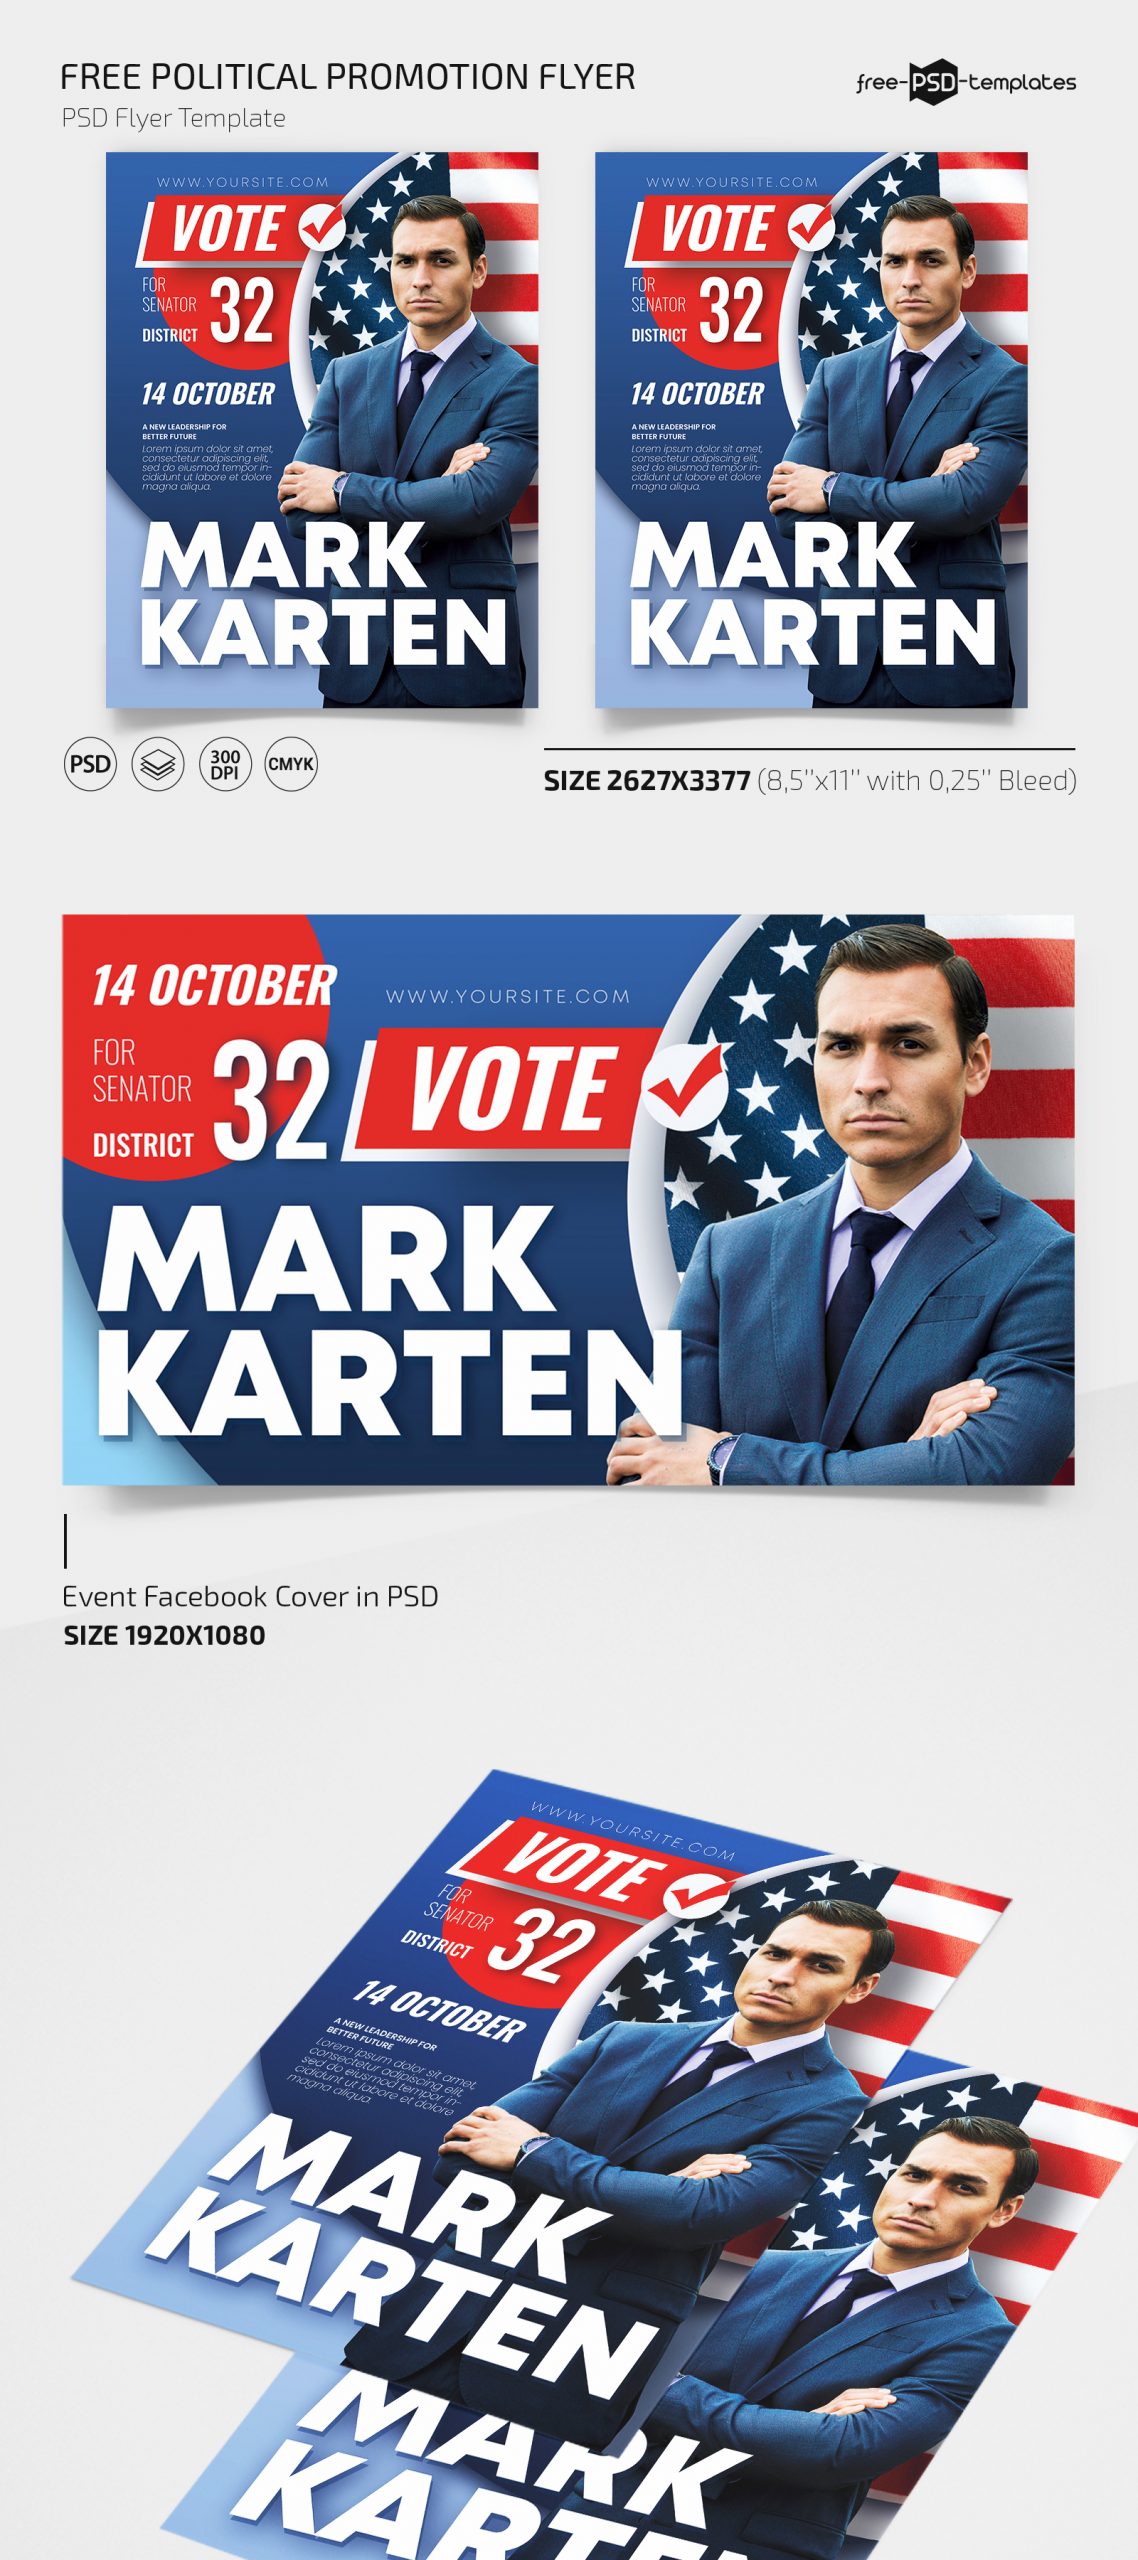 Political Promotion – Free PSD Flyer Template